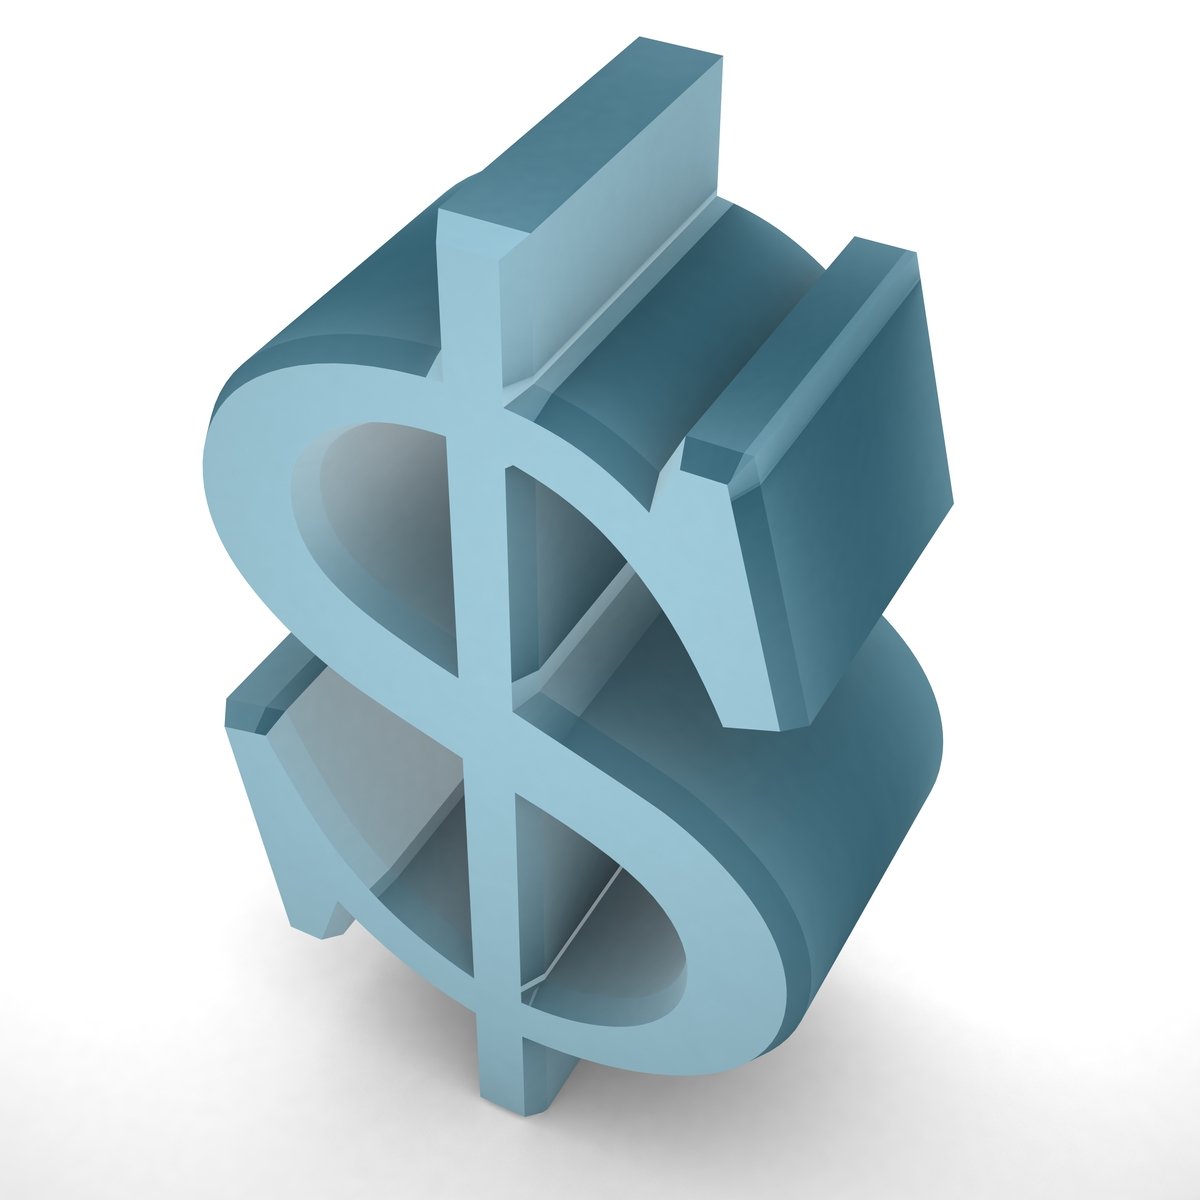 an abstract model of the dollar sign made of two parts